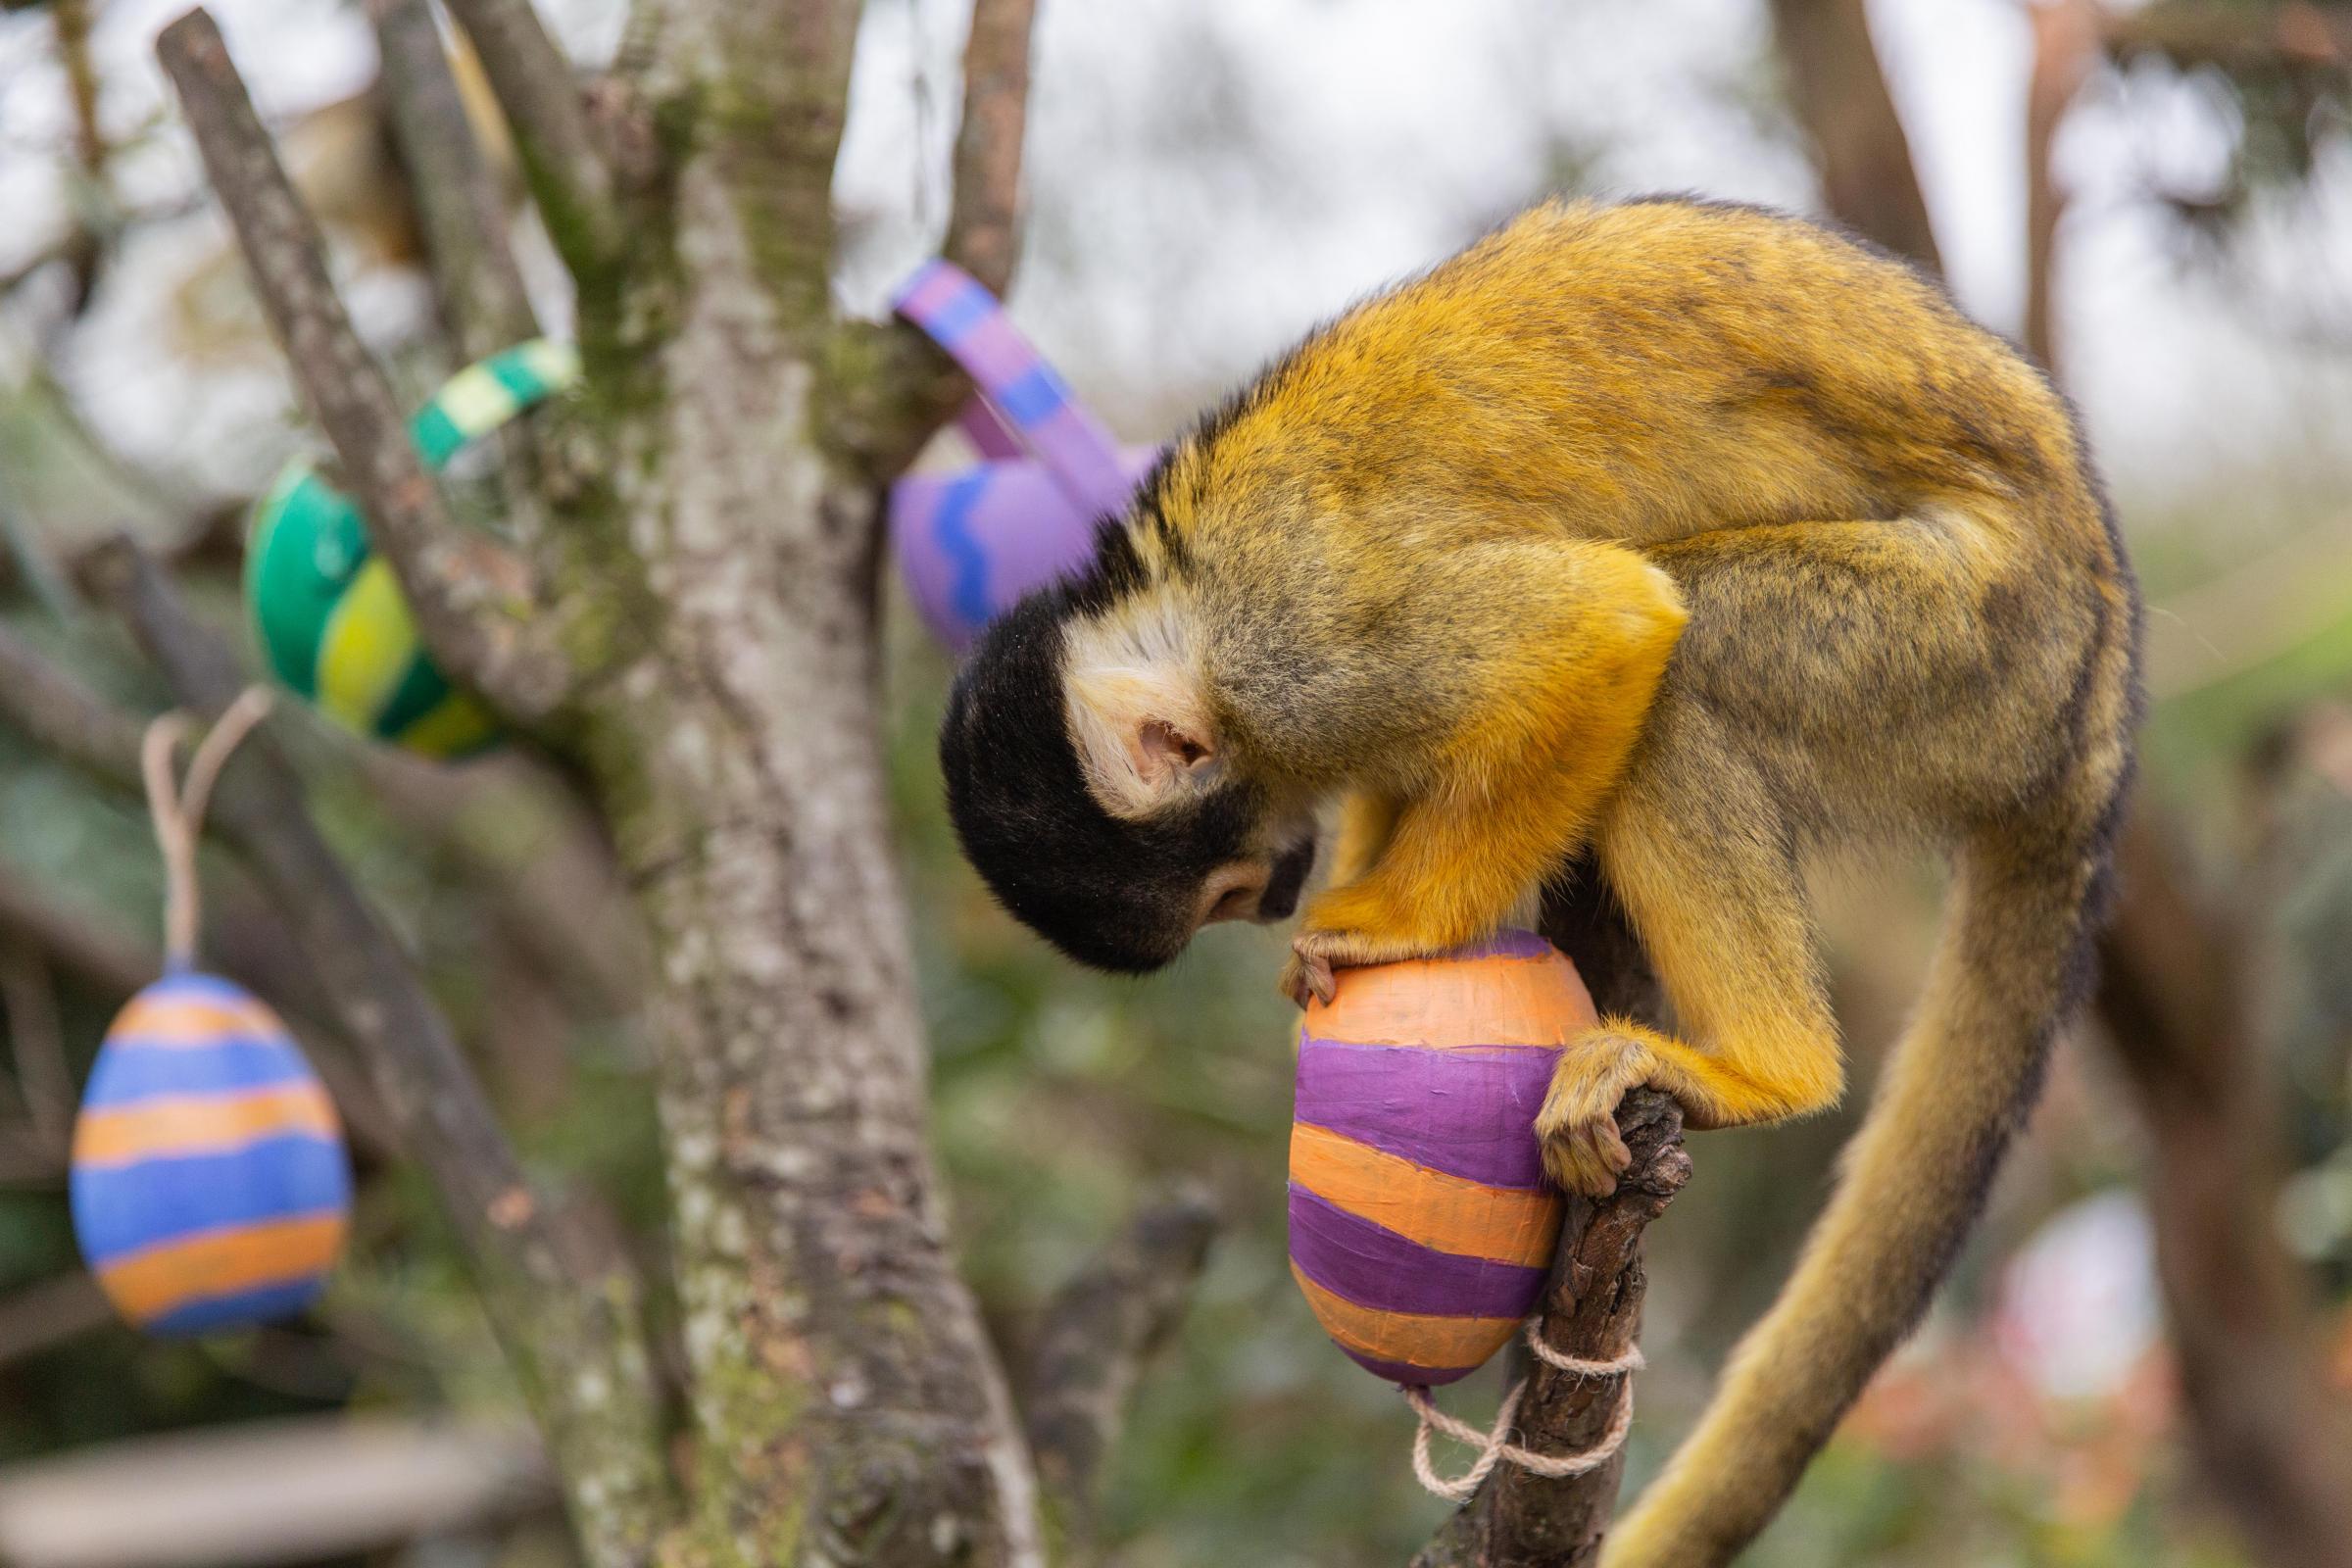 Photo taken by staff at ZSL London Zoo of squirrel monkeys enjoying Easter treats at the attraction